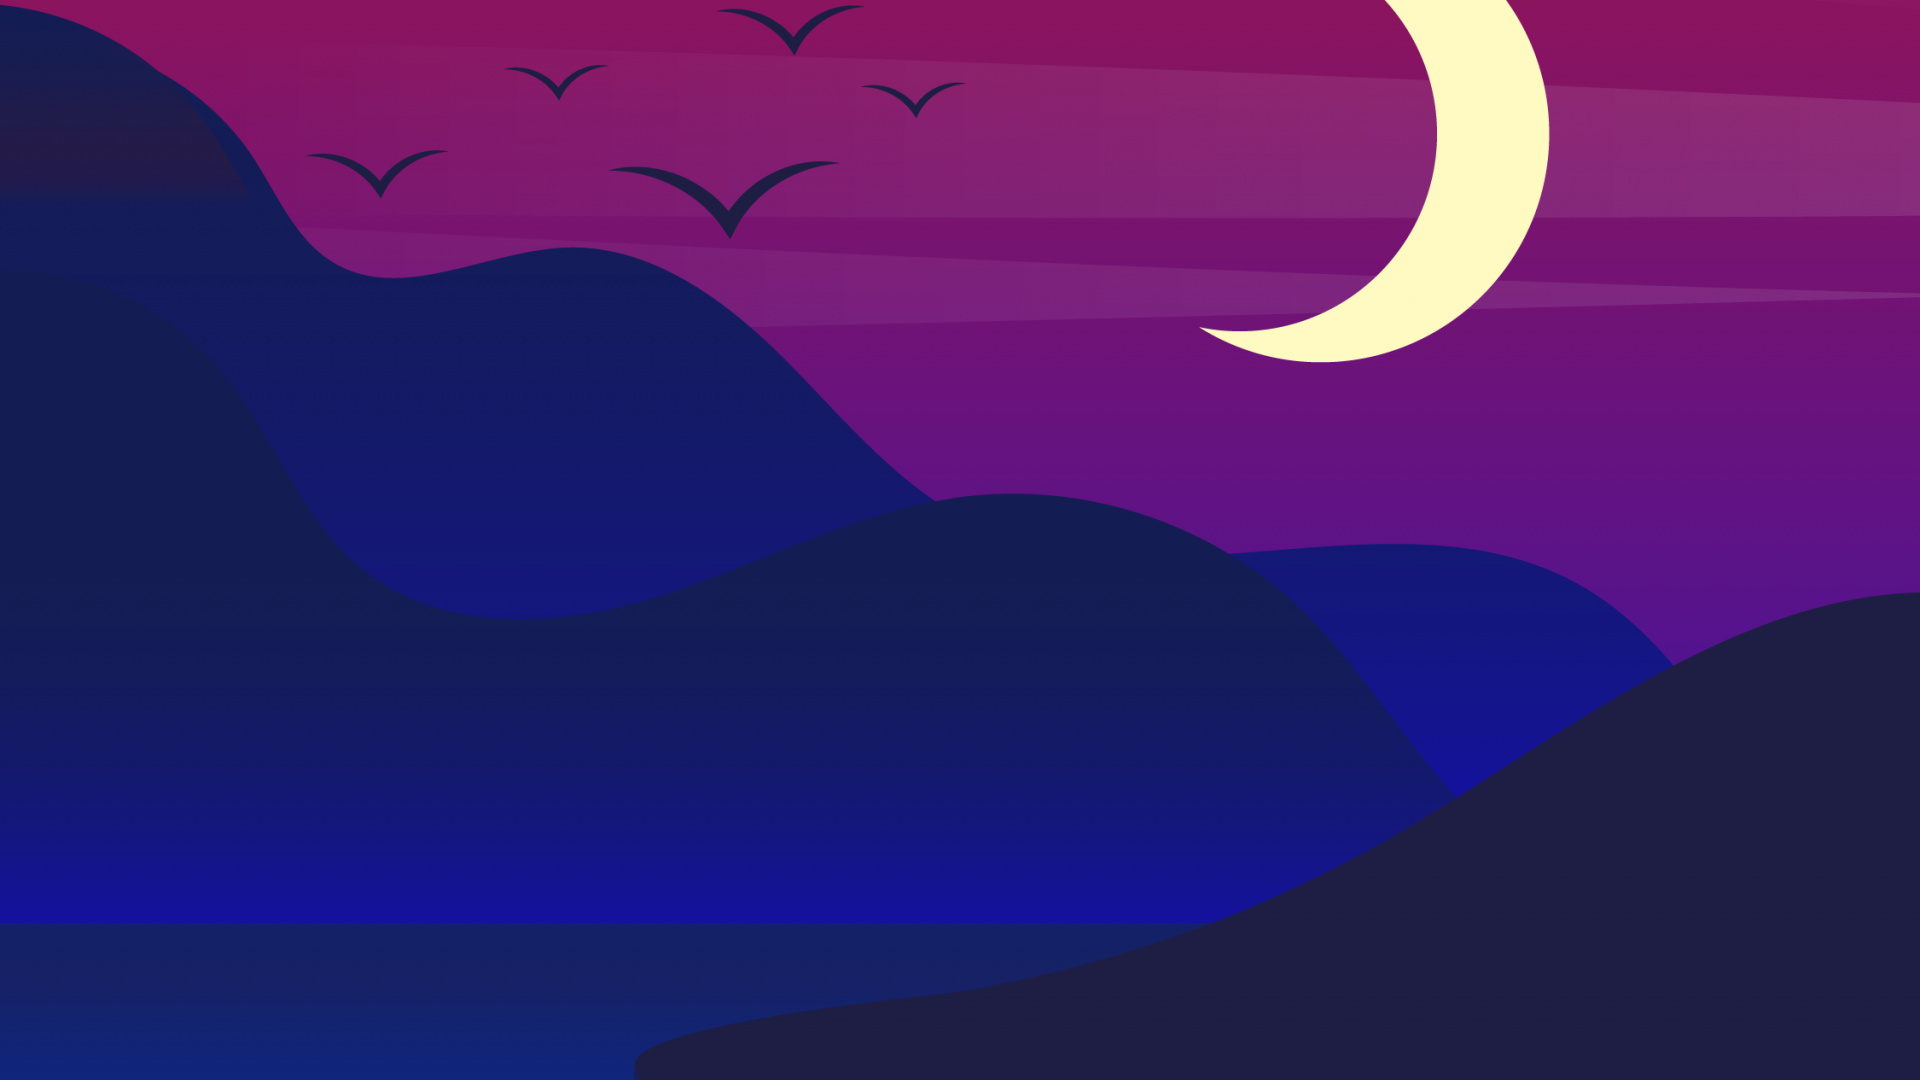 Tablet, Ambiente, Luna, Afterglow, Atardecer. Wallpaper in 1920x1080 Resolution